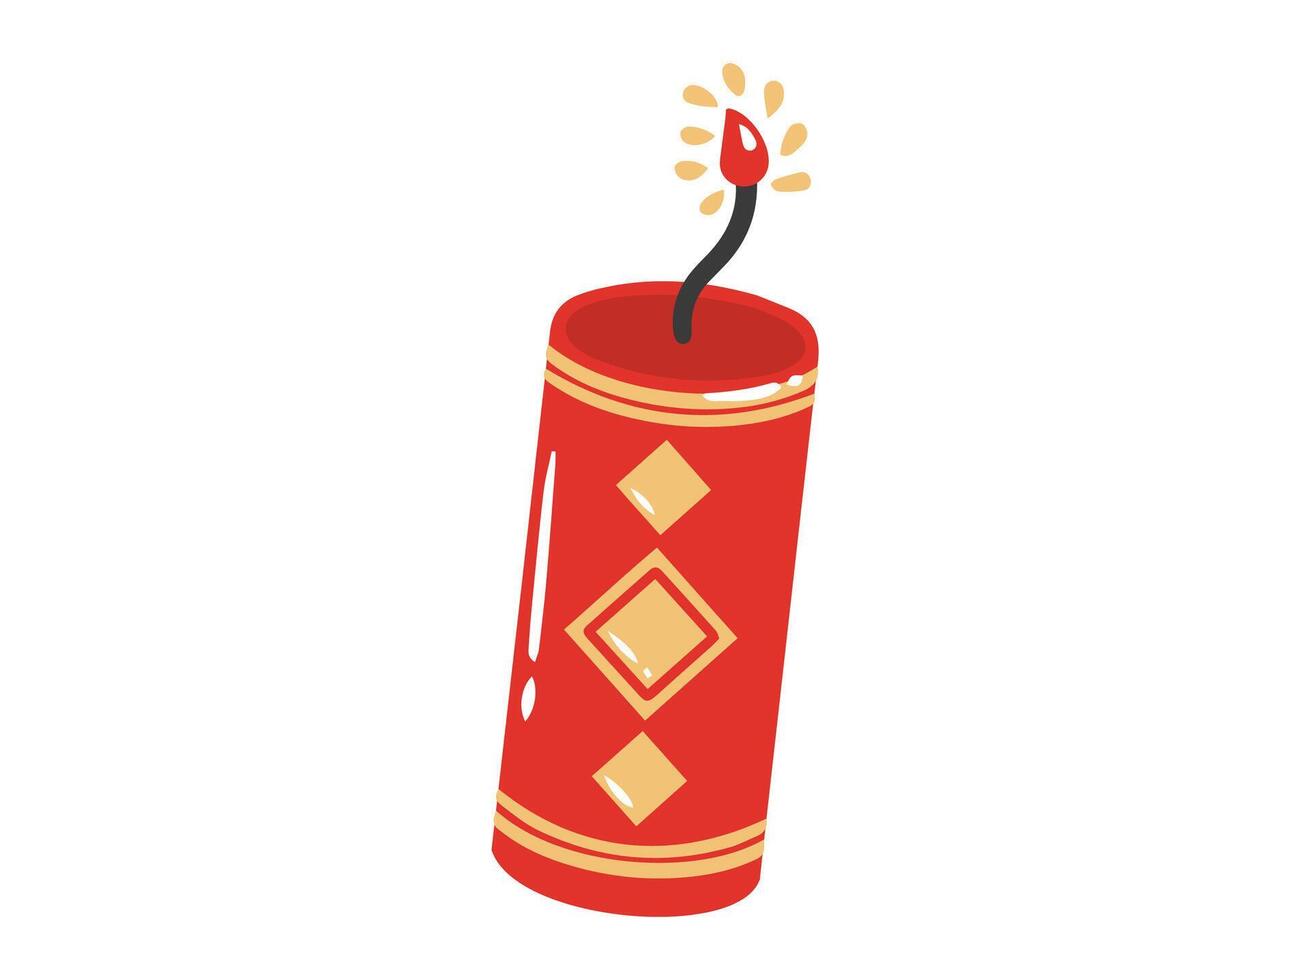 Chinese New Year Firecrackers Illustration vector